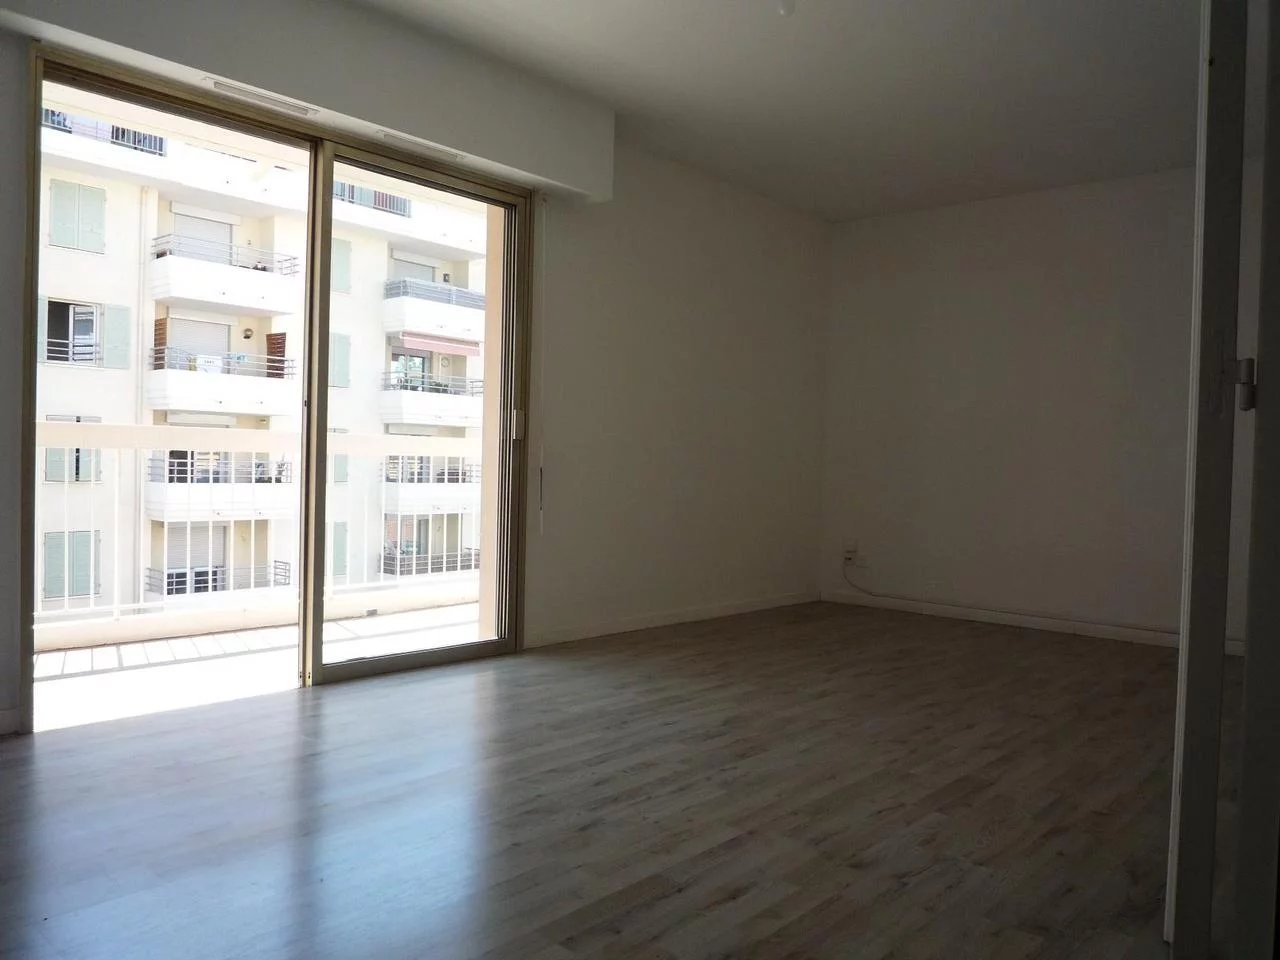 Appartement  2 Rooms 54.55m2  for sale   260 000 €